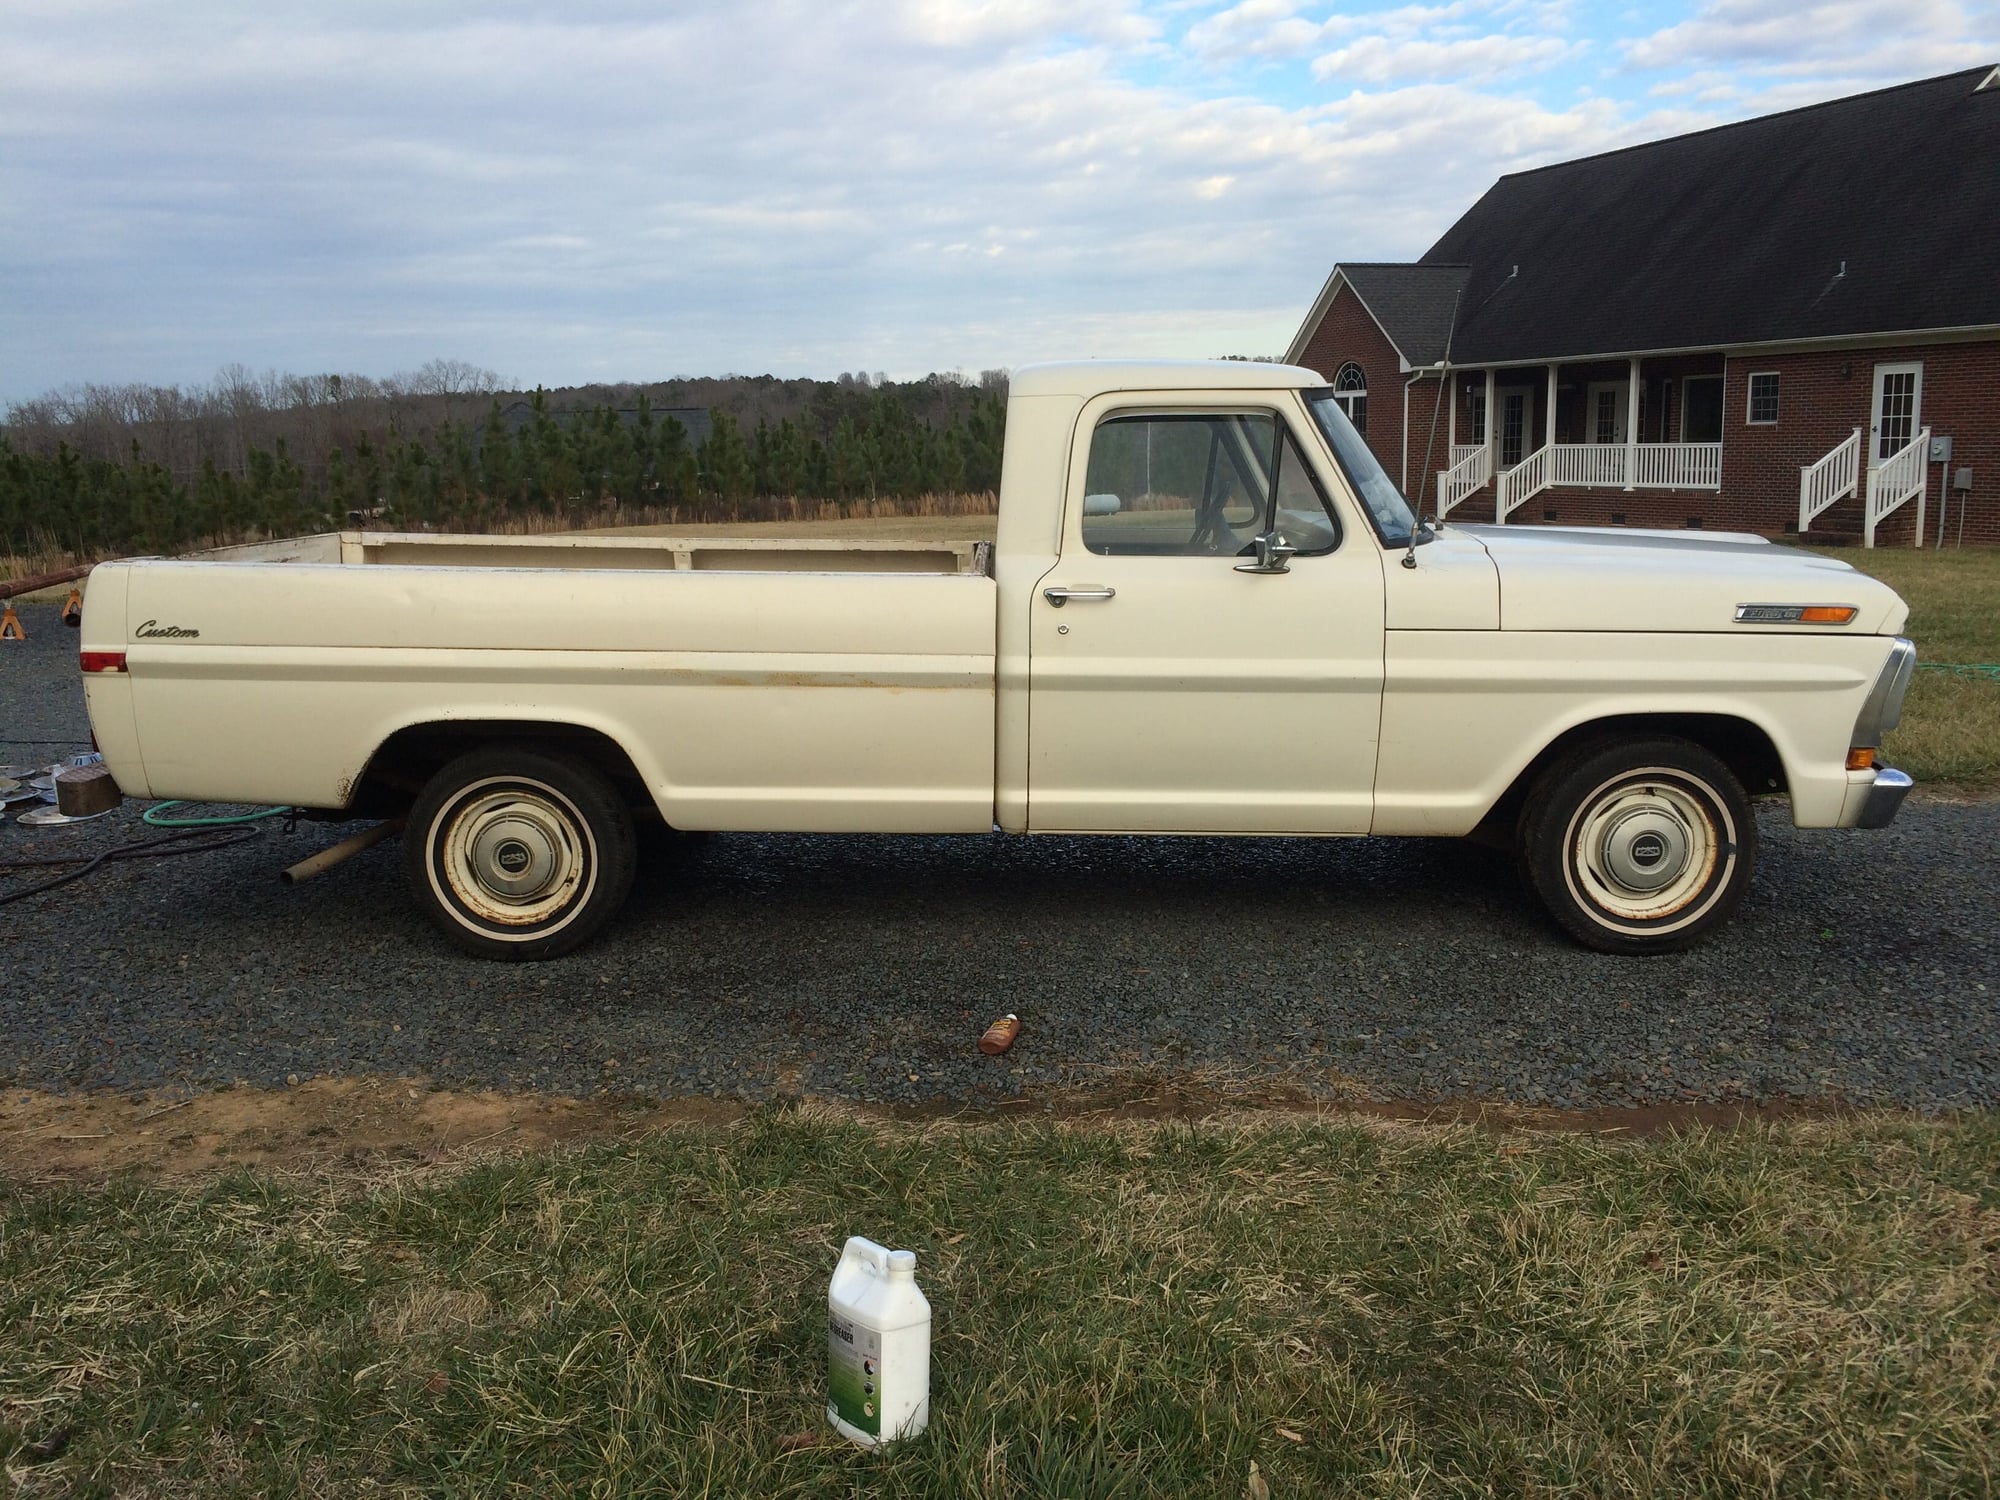 1971 Ford F-100 - 1971 F100 - Used - VIN F100197119734447A - 8 cyl - 2WD - Manual - Truck - White - Albemarle, NC 28001, United States